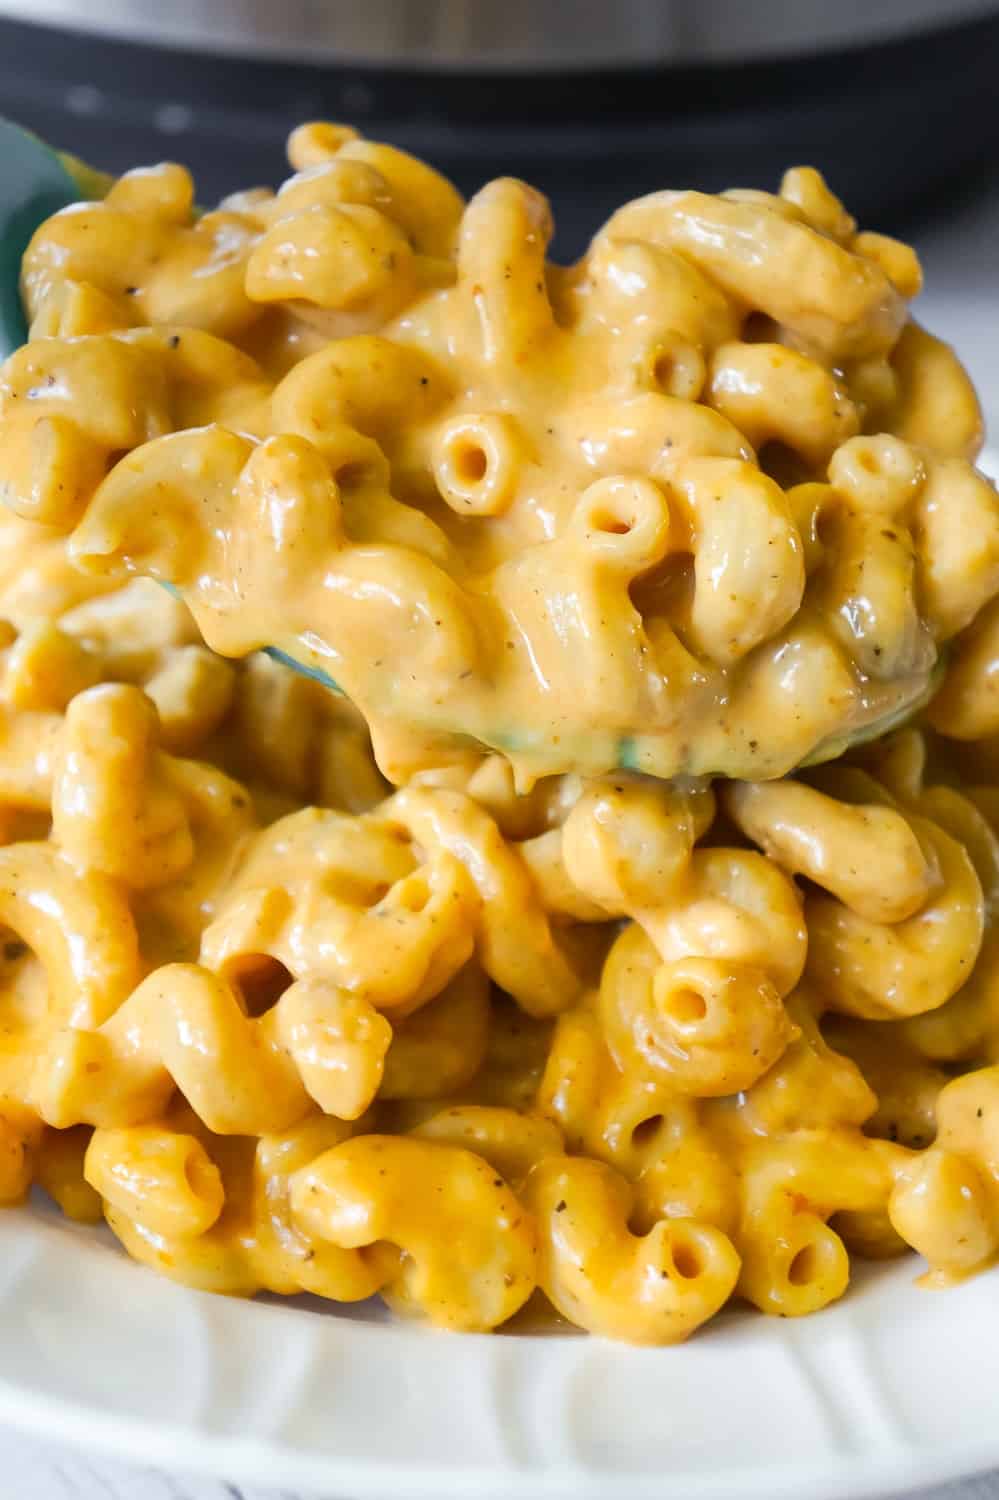 Instant Pot Pumpkin Mac and Cheese is a delicious pressure cooker pasta recipe using canned pumpkin, cavatappi noodles and Havarti cheese.